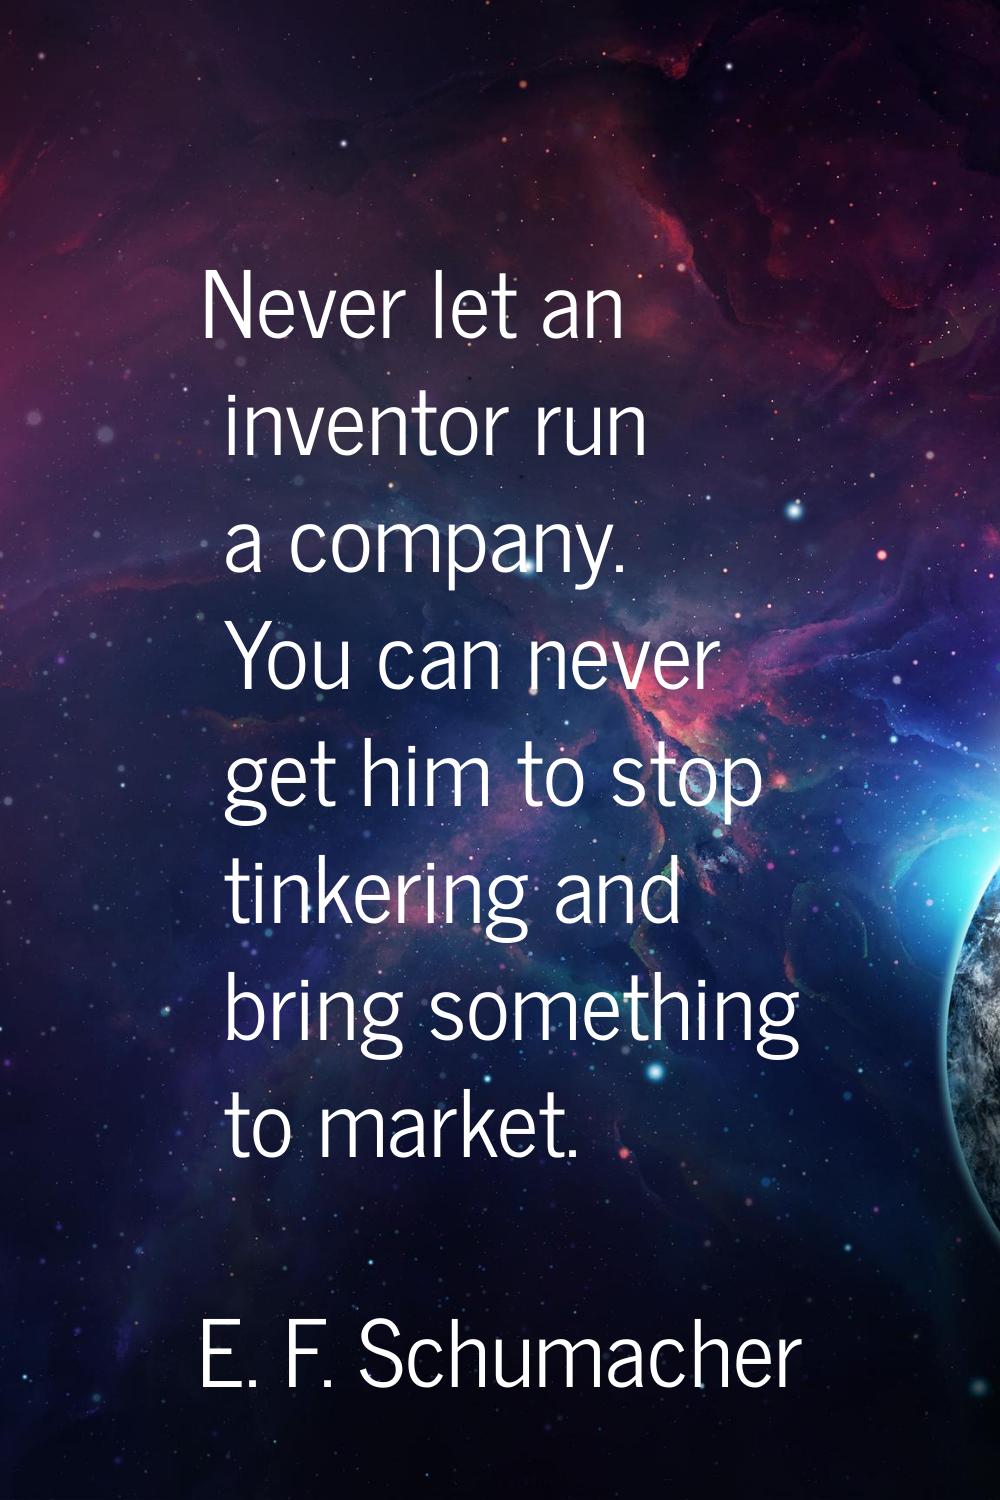 Never let an inventor run a company. You can never get him to stop tinkering and bring something to